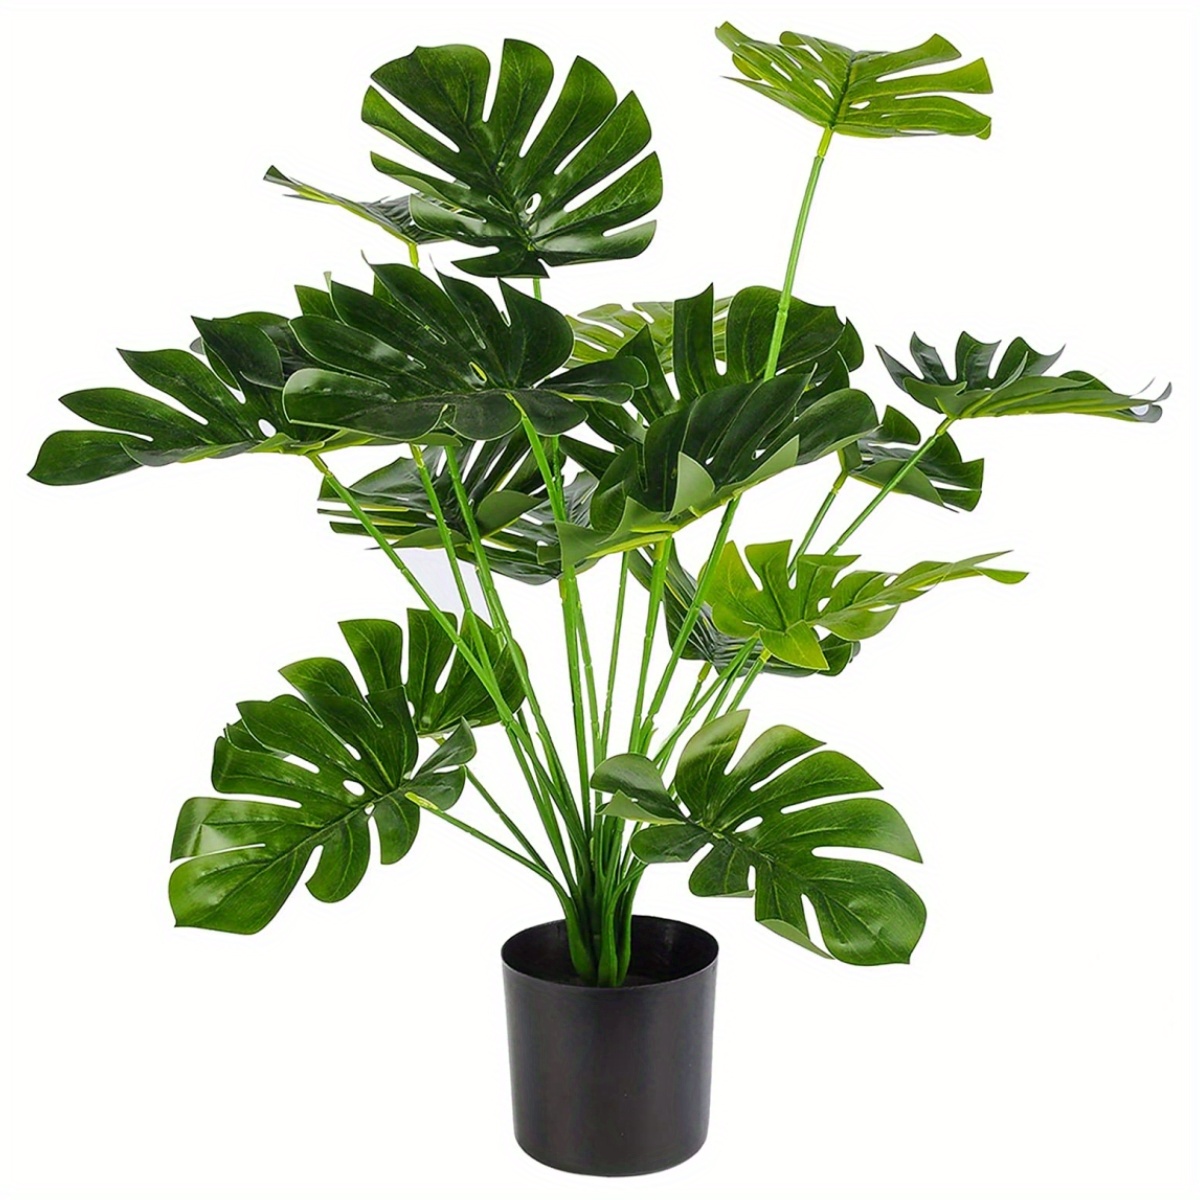 

versatile Placement" Large Artificial Monstera Plant - Lifelike Faux Greenery For Home & Office Decor, Adjustable Branches, No Maintenance Required